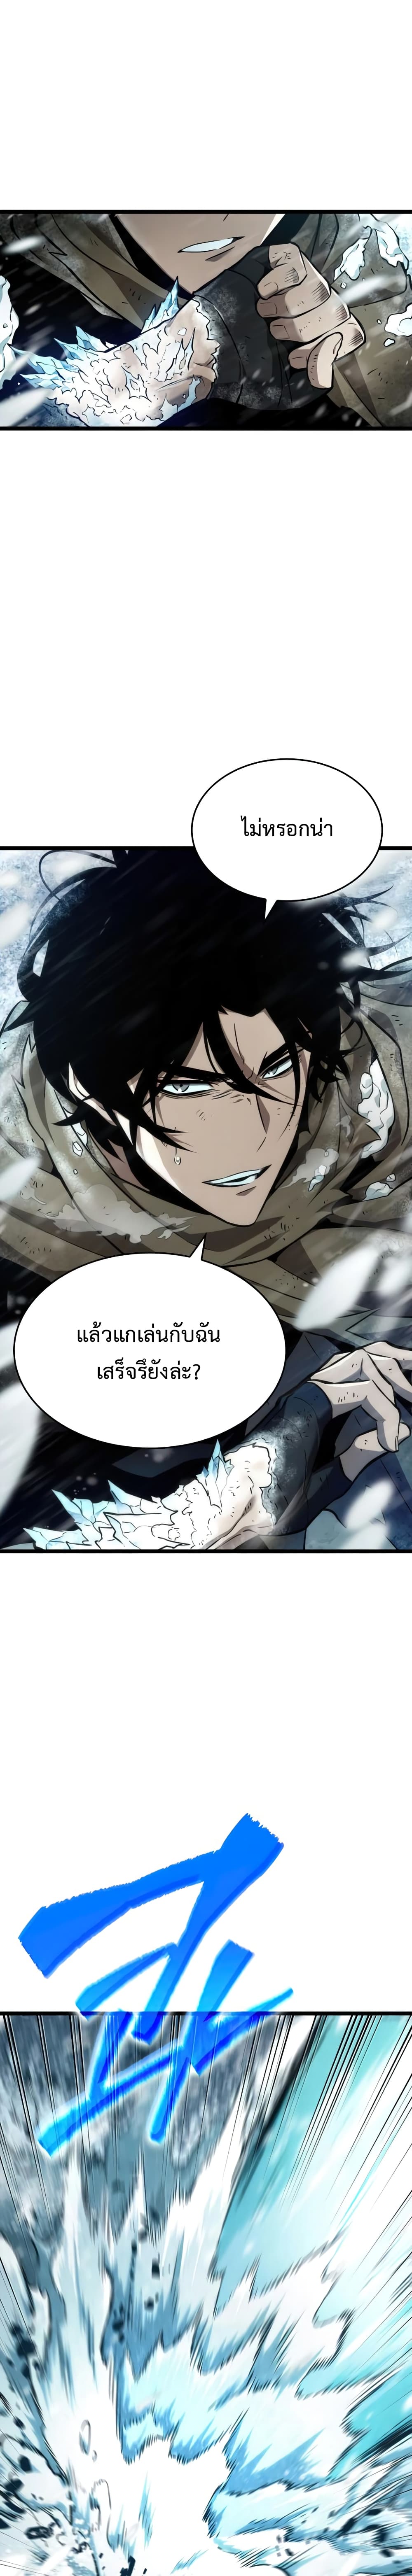 The World After The End 3 แปลไทย